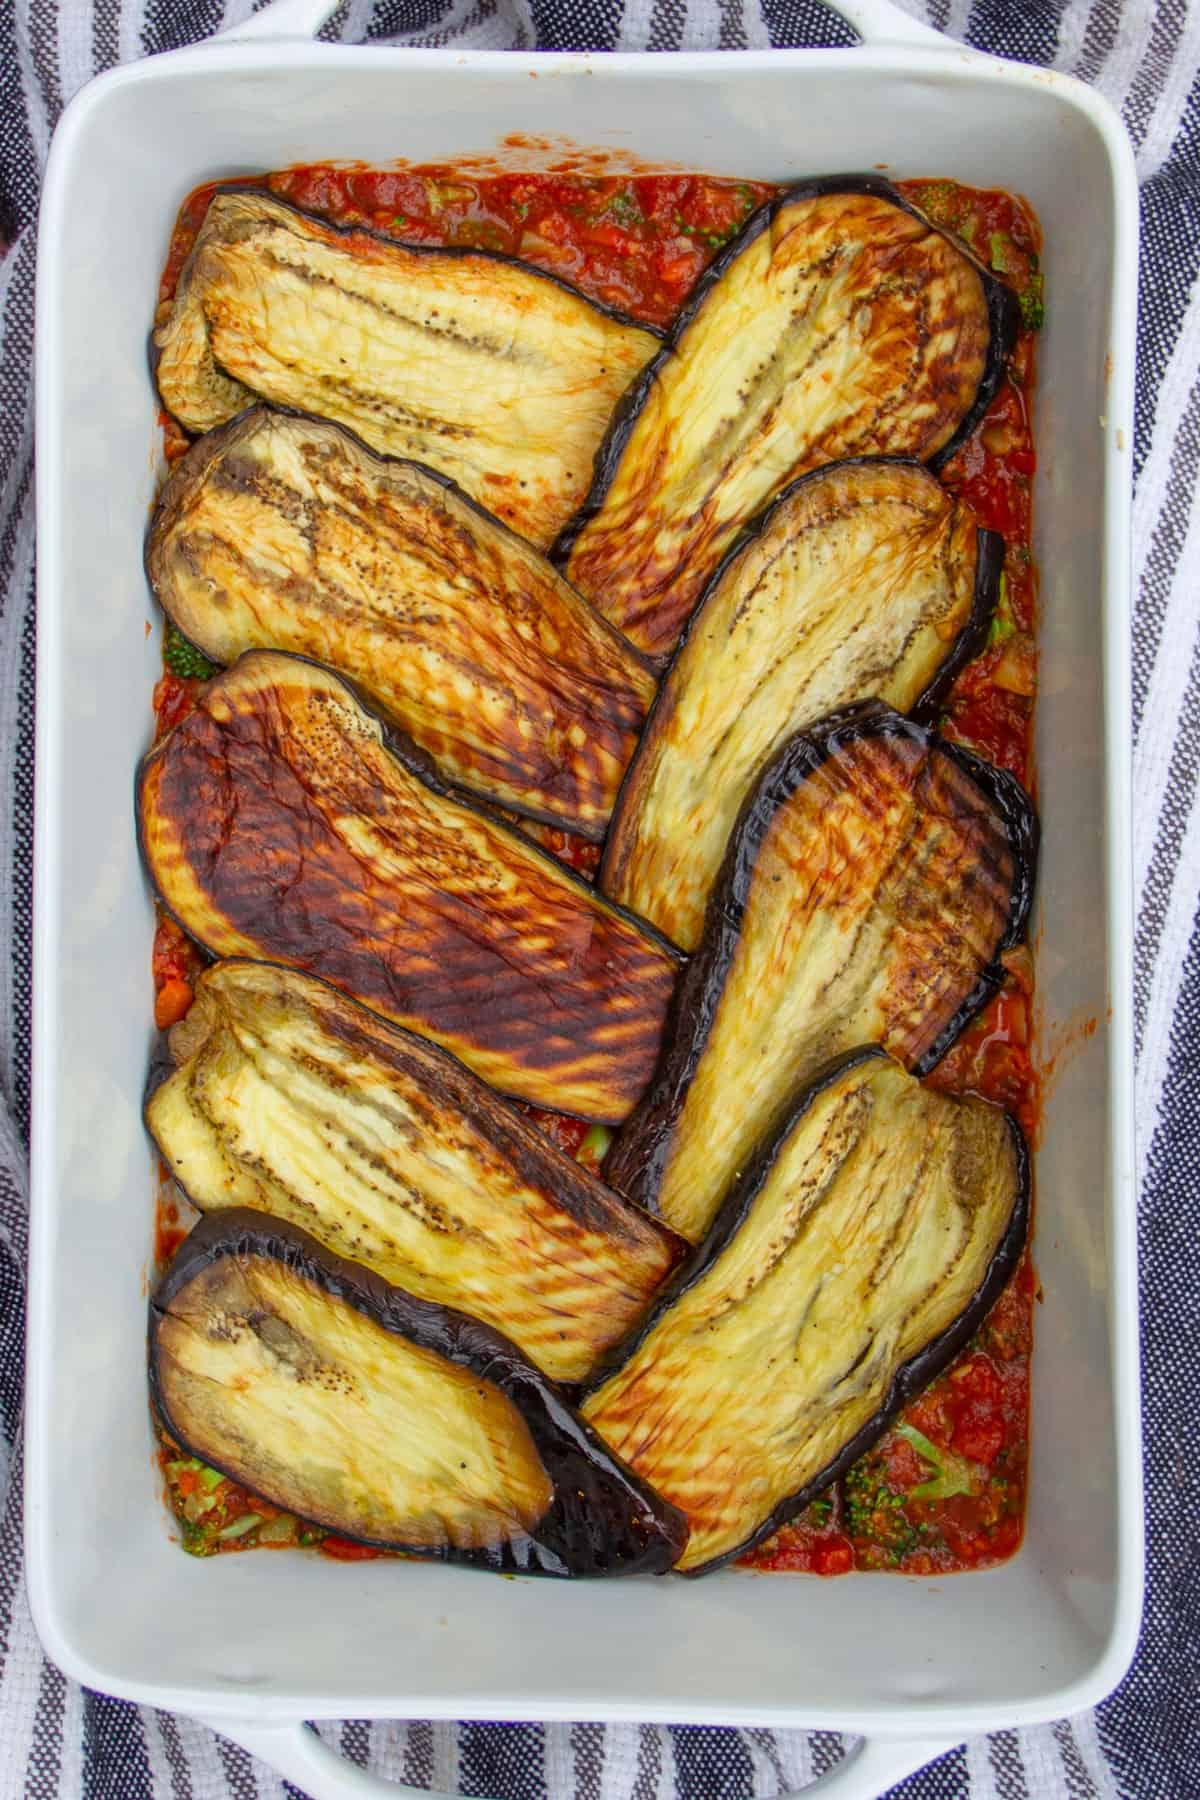 9 thin slices of roasted eggplant arranged in a rectangular casserole in an angled pattern, on top of a layer of tomato sauce